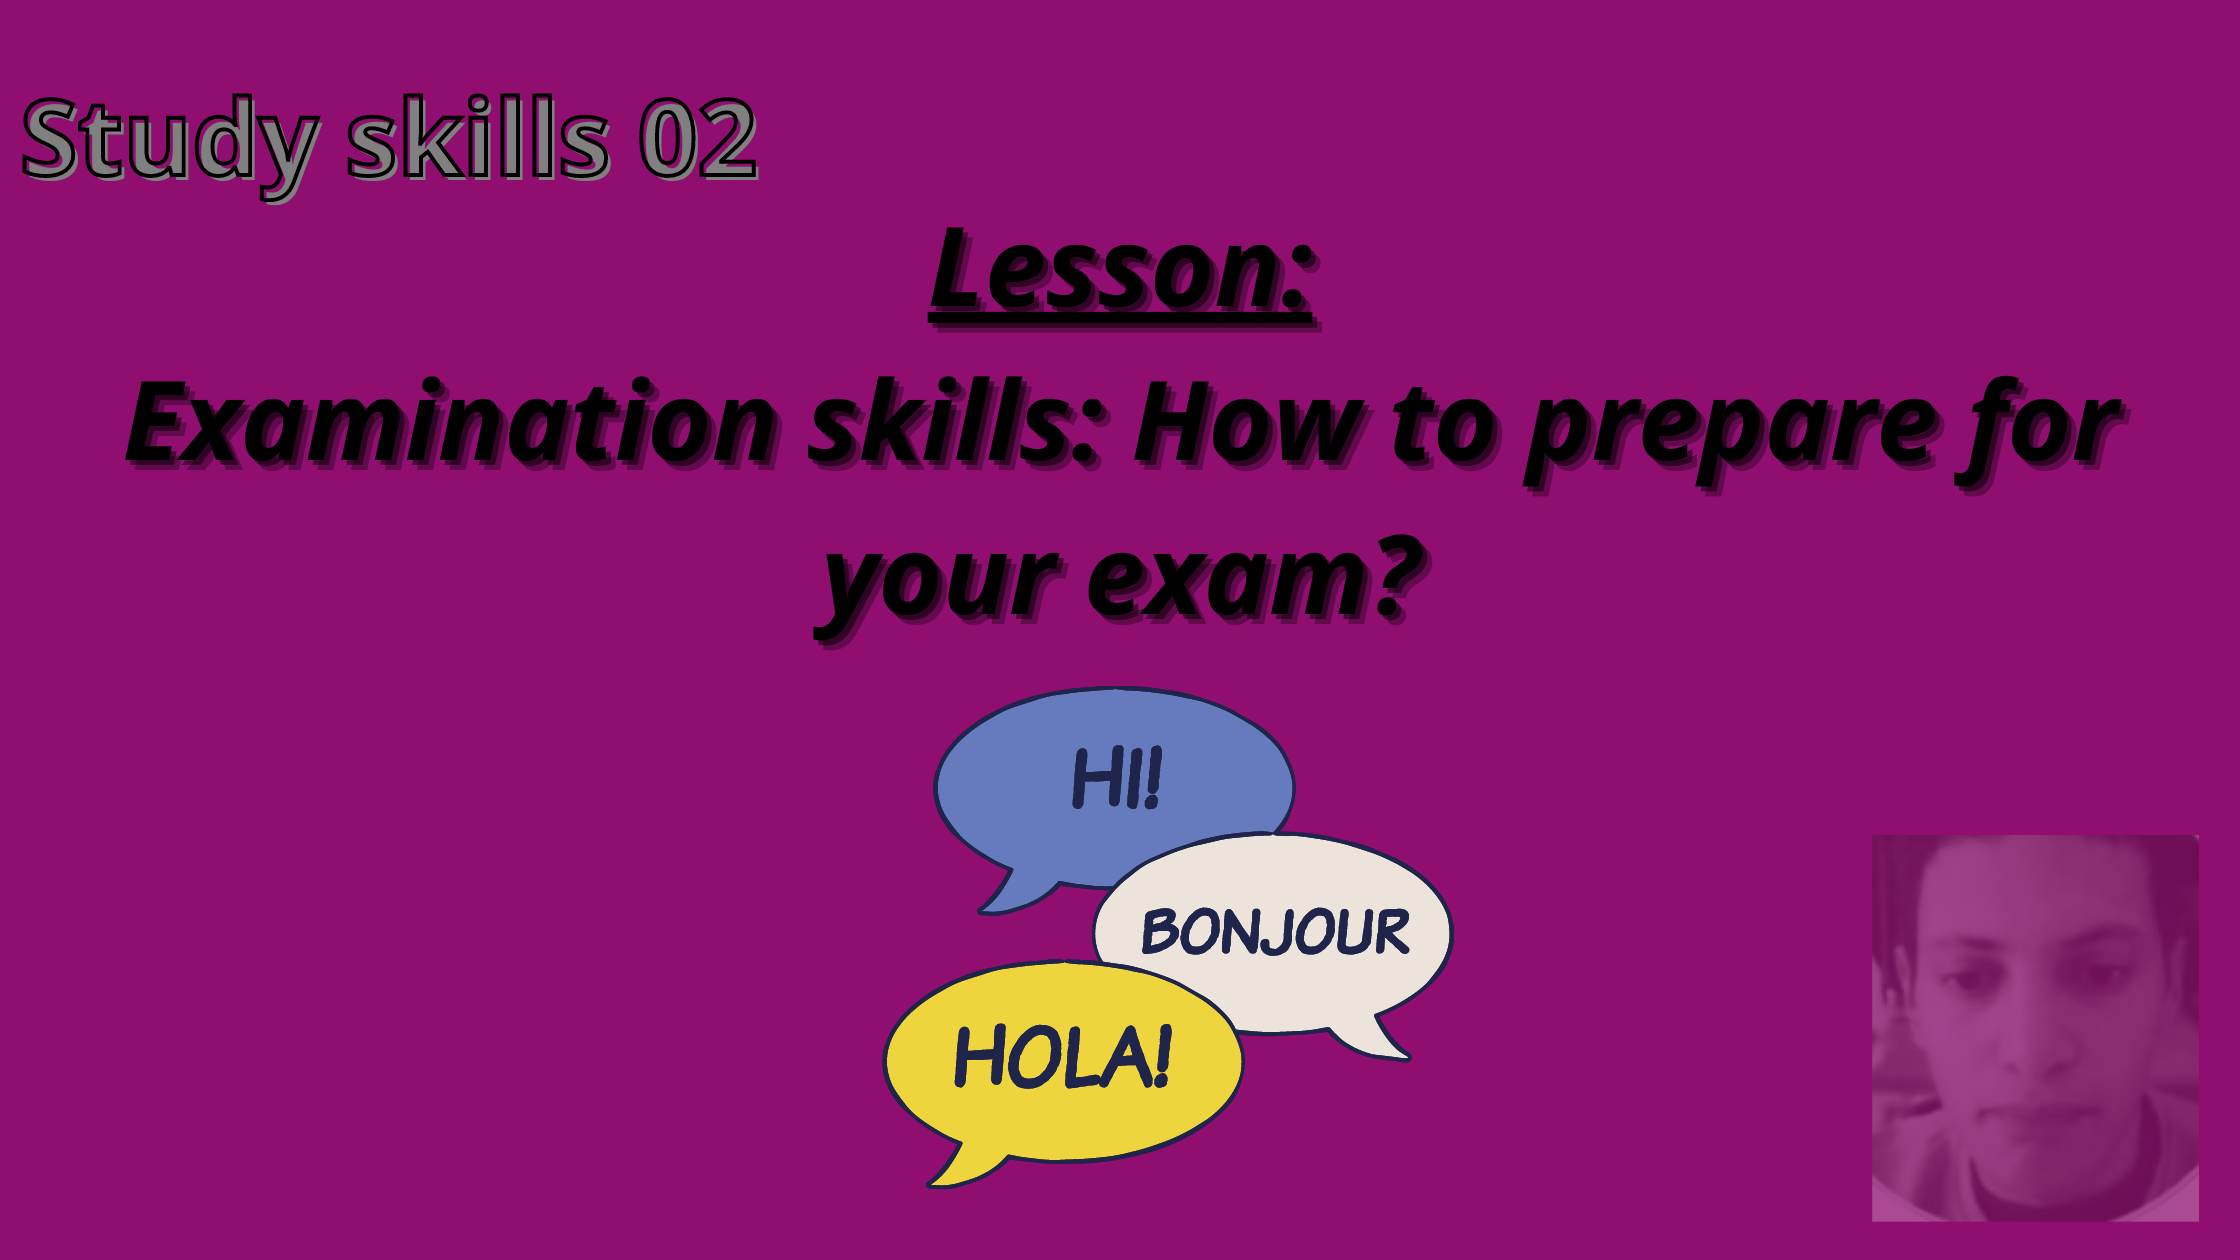 Examination skills: How to prepare for your exam?